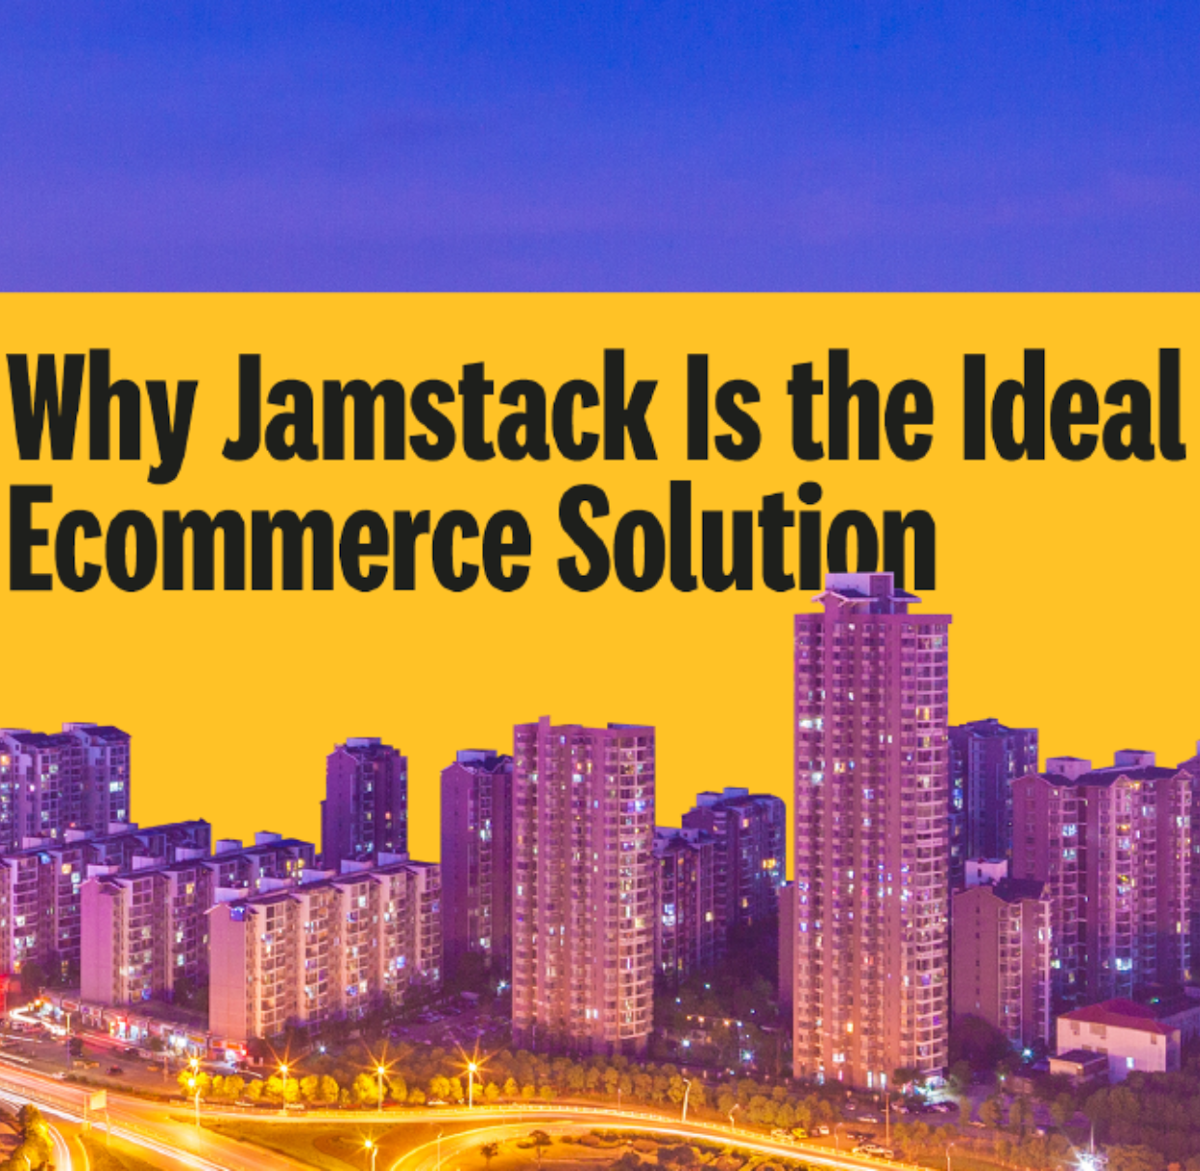 Jamstack for ecommerce